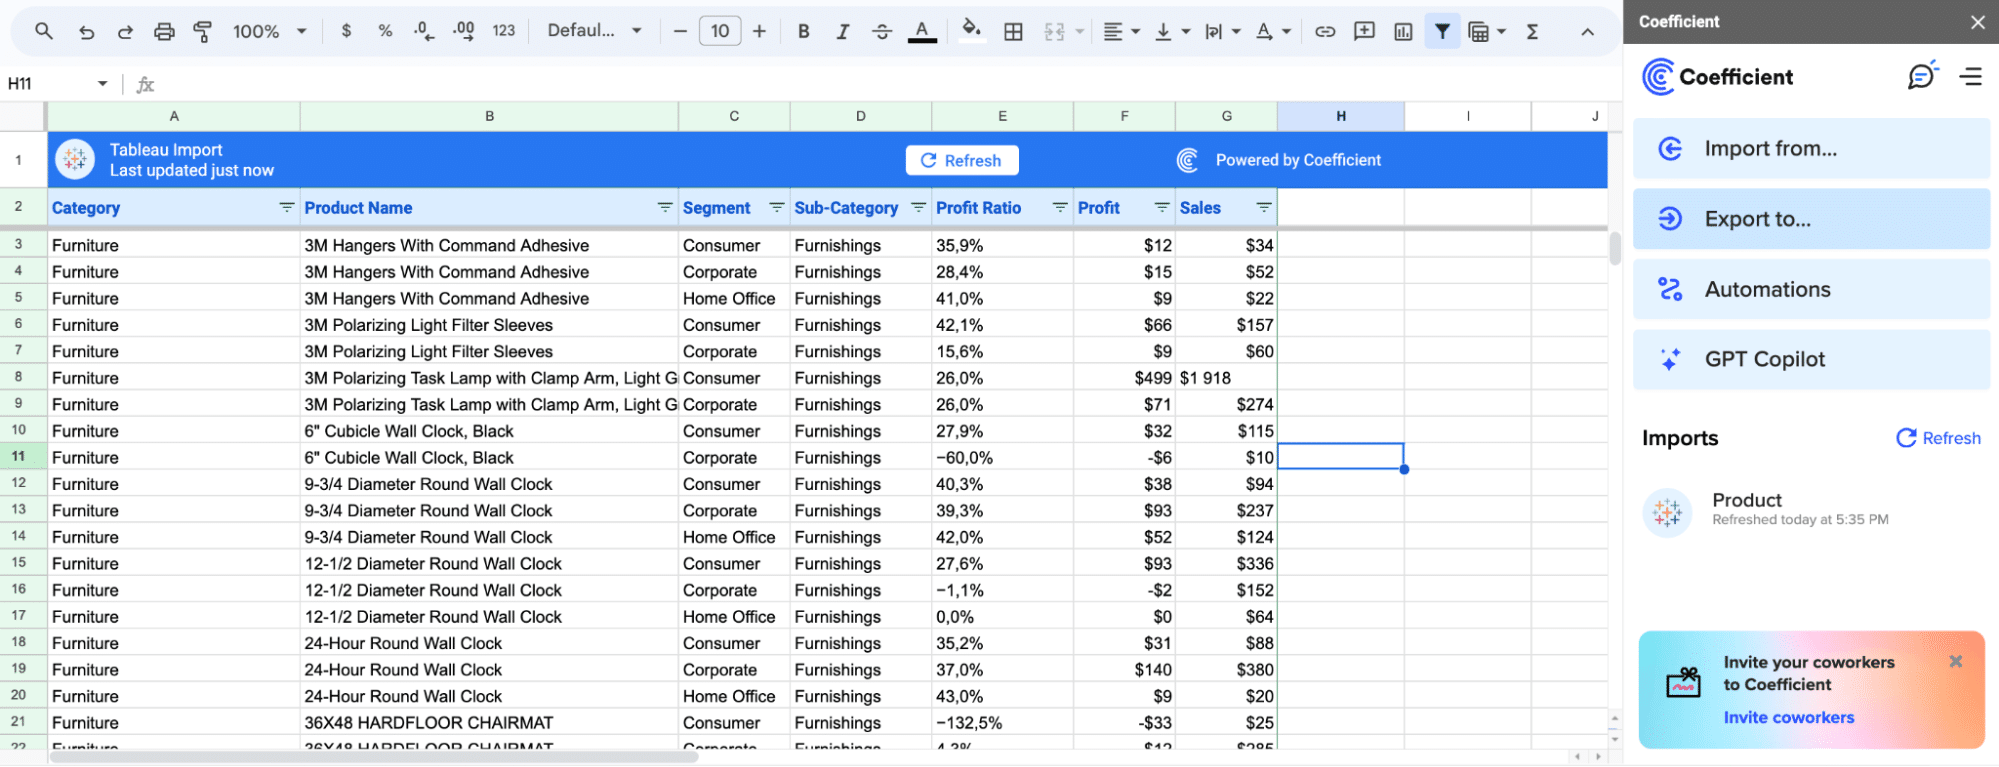 Effortlessly syncing live data from your business systems directly into Excel or Google Sheets with Coefficient.